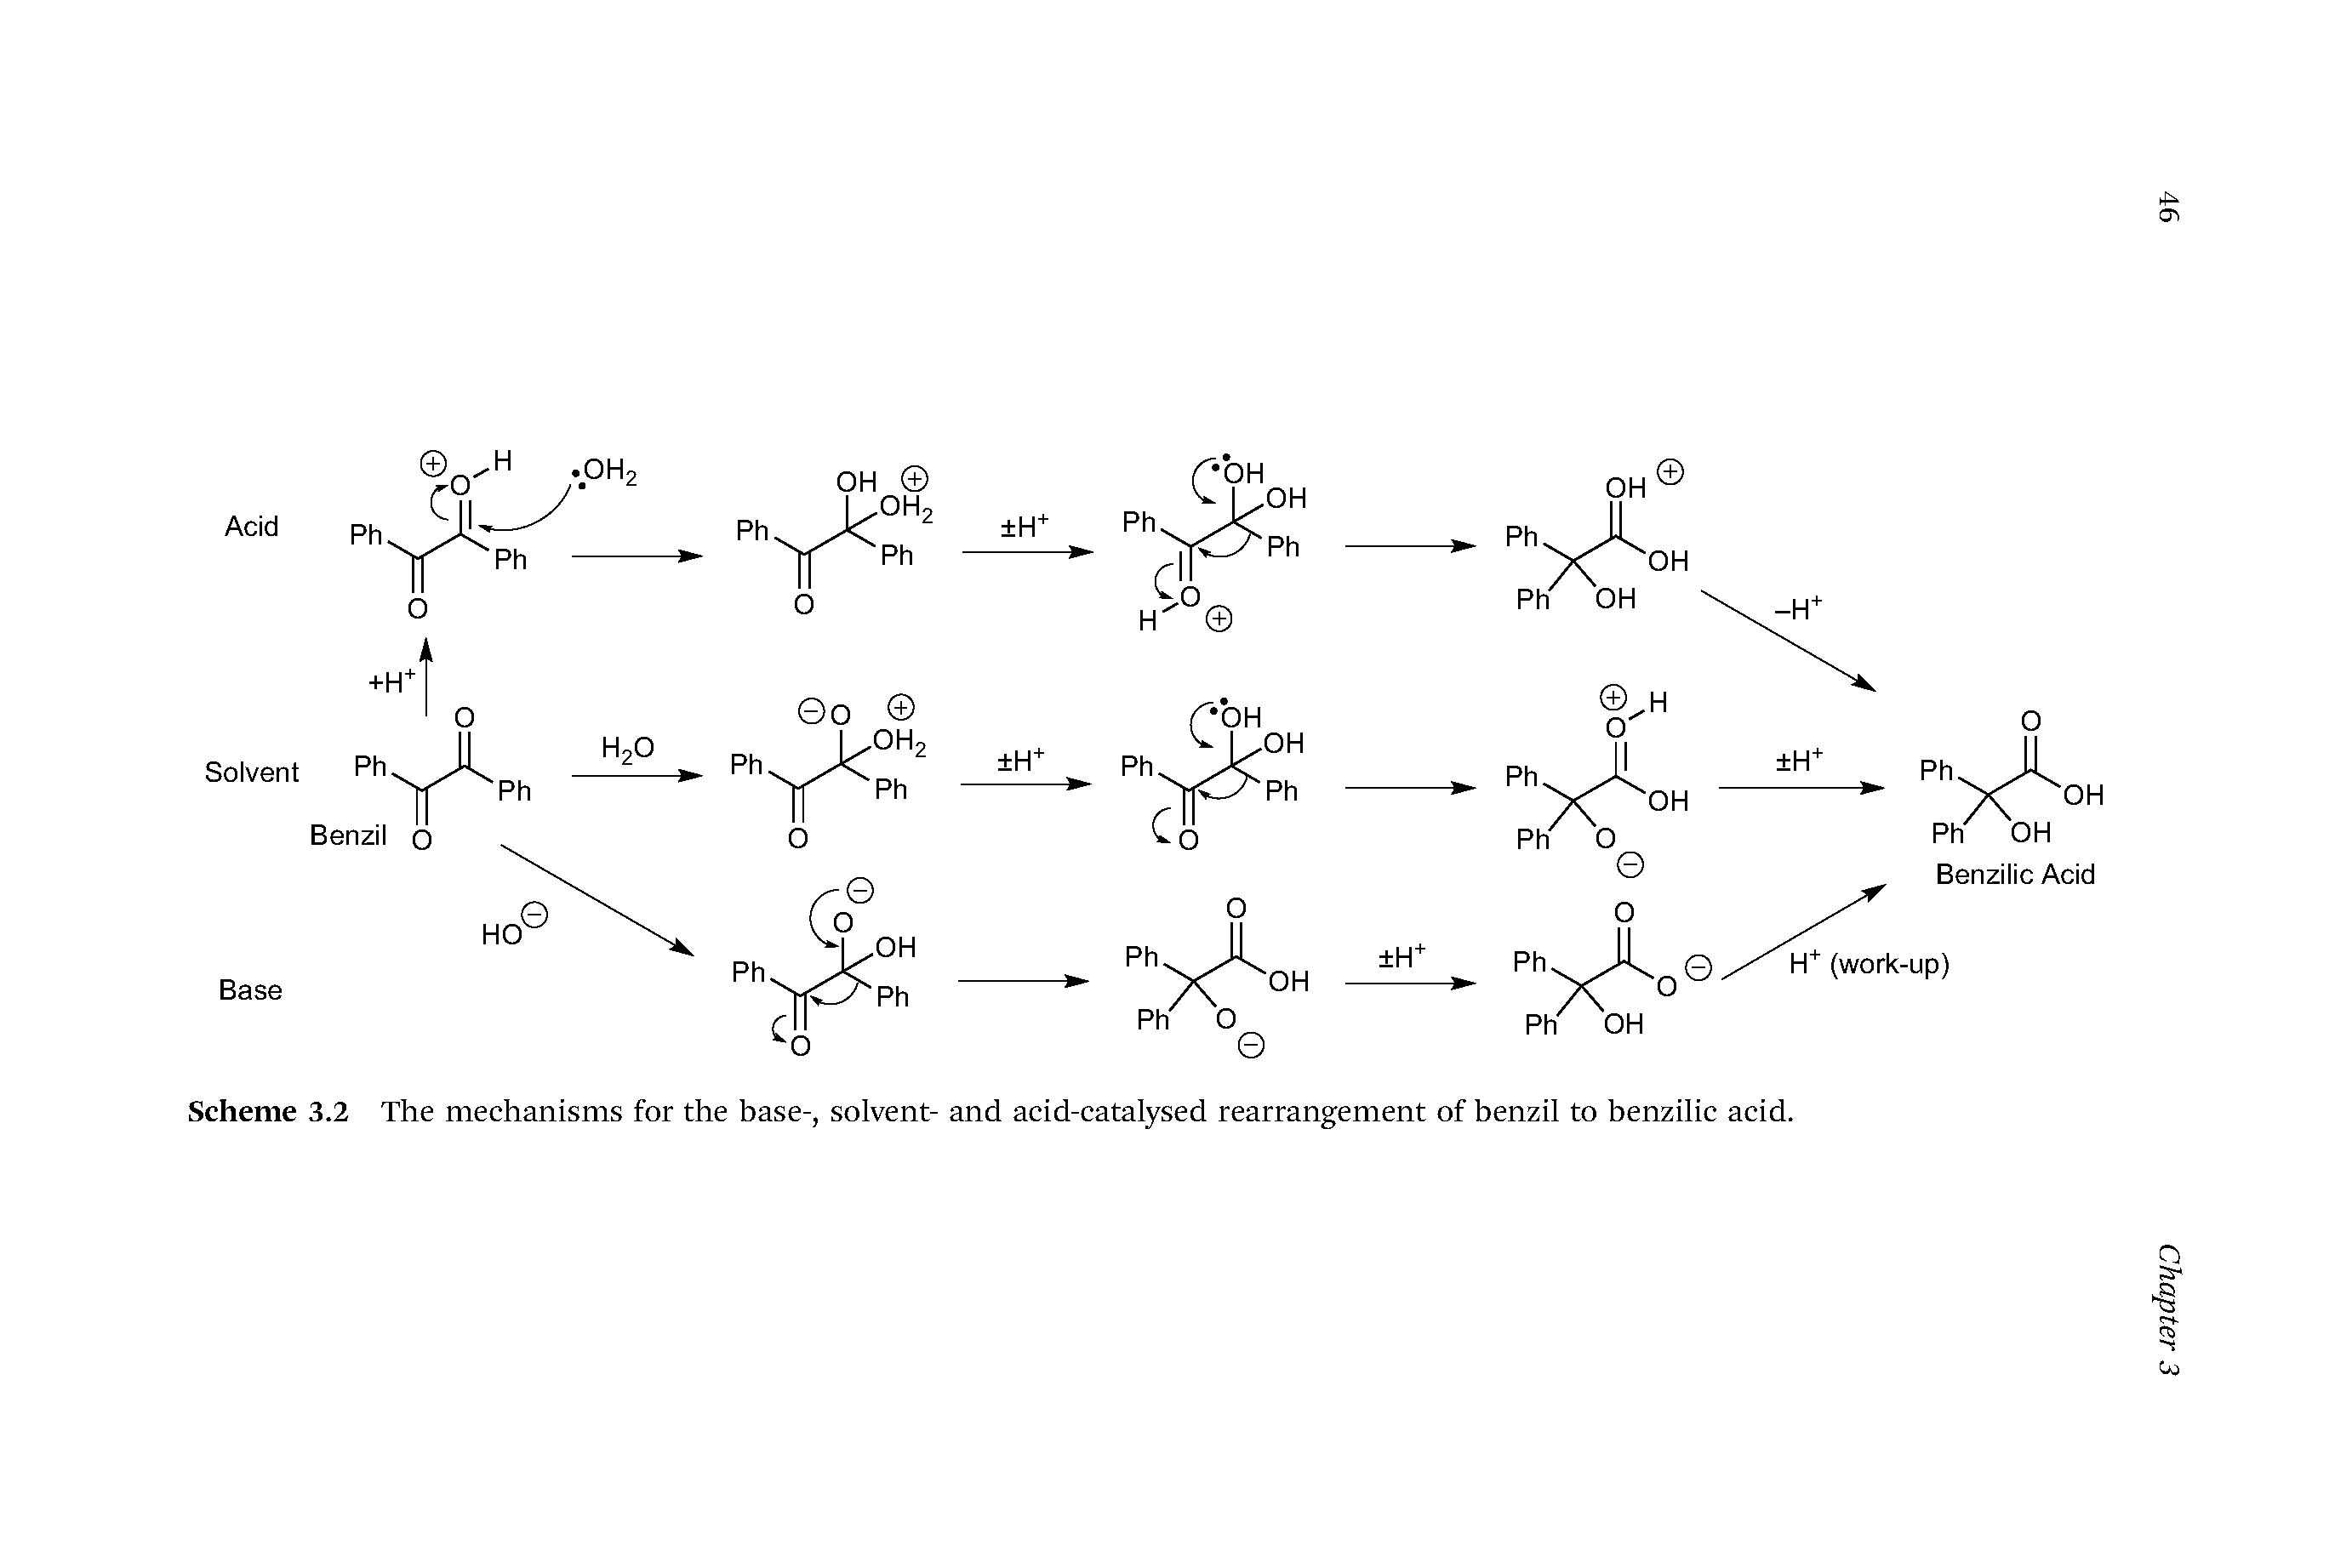 Scheme 3.2 The mechanisms for the base-, solvent- and acid-catalysed rearrangement of benzil to benzilic acid.